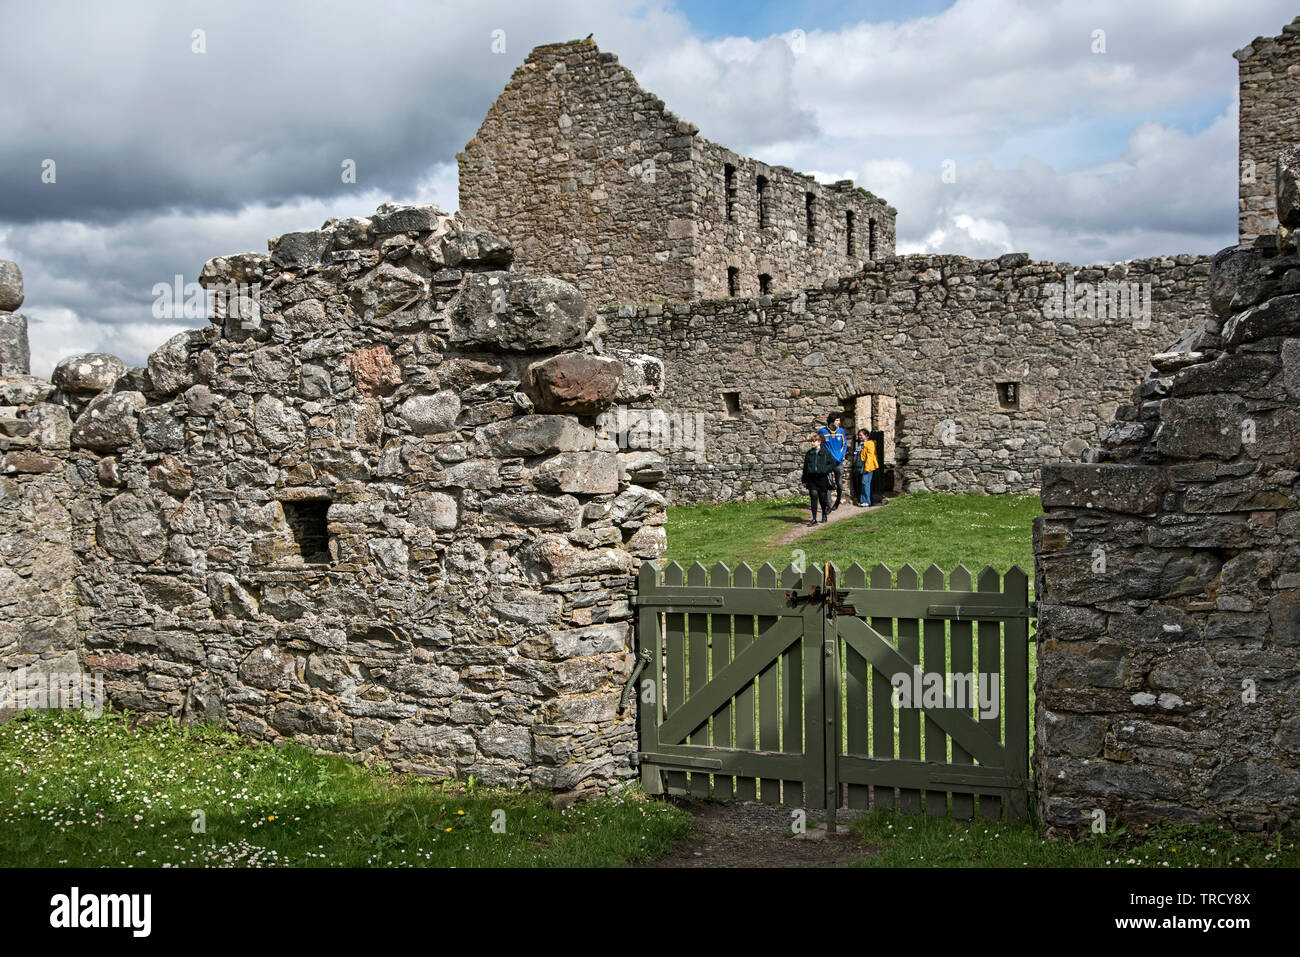 View of Ruthven Barracks from the Stables, both now ruins and owned by Historic Scotland, near Kingussie in Cairngorms National Park, Scotland, UK. Stock Photo